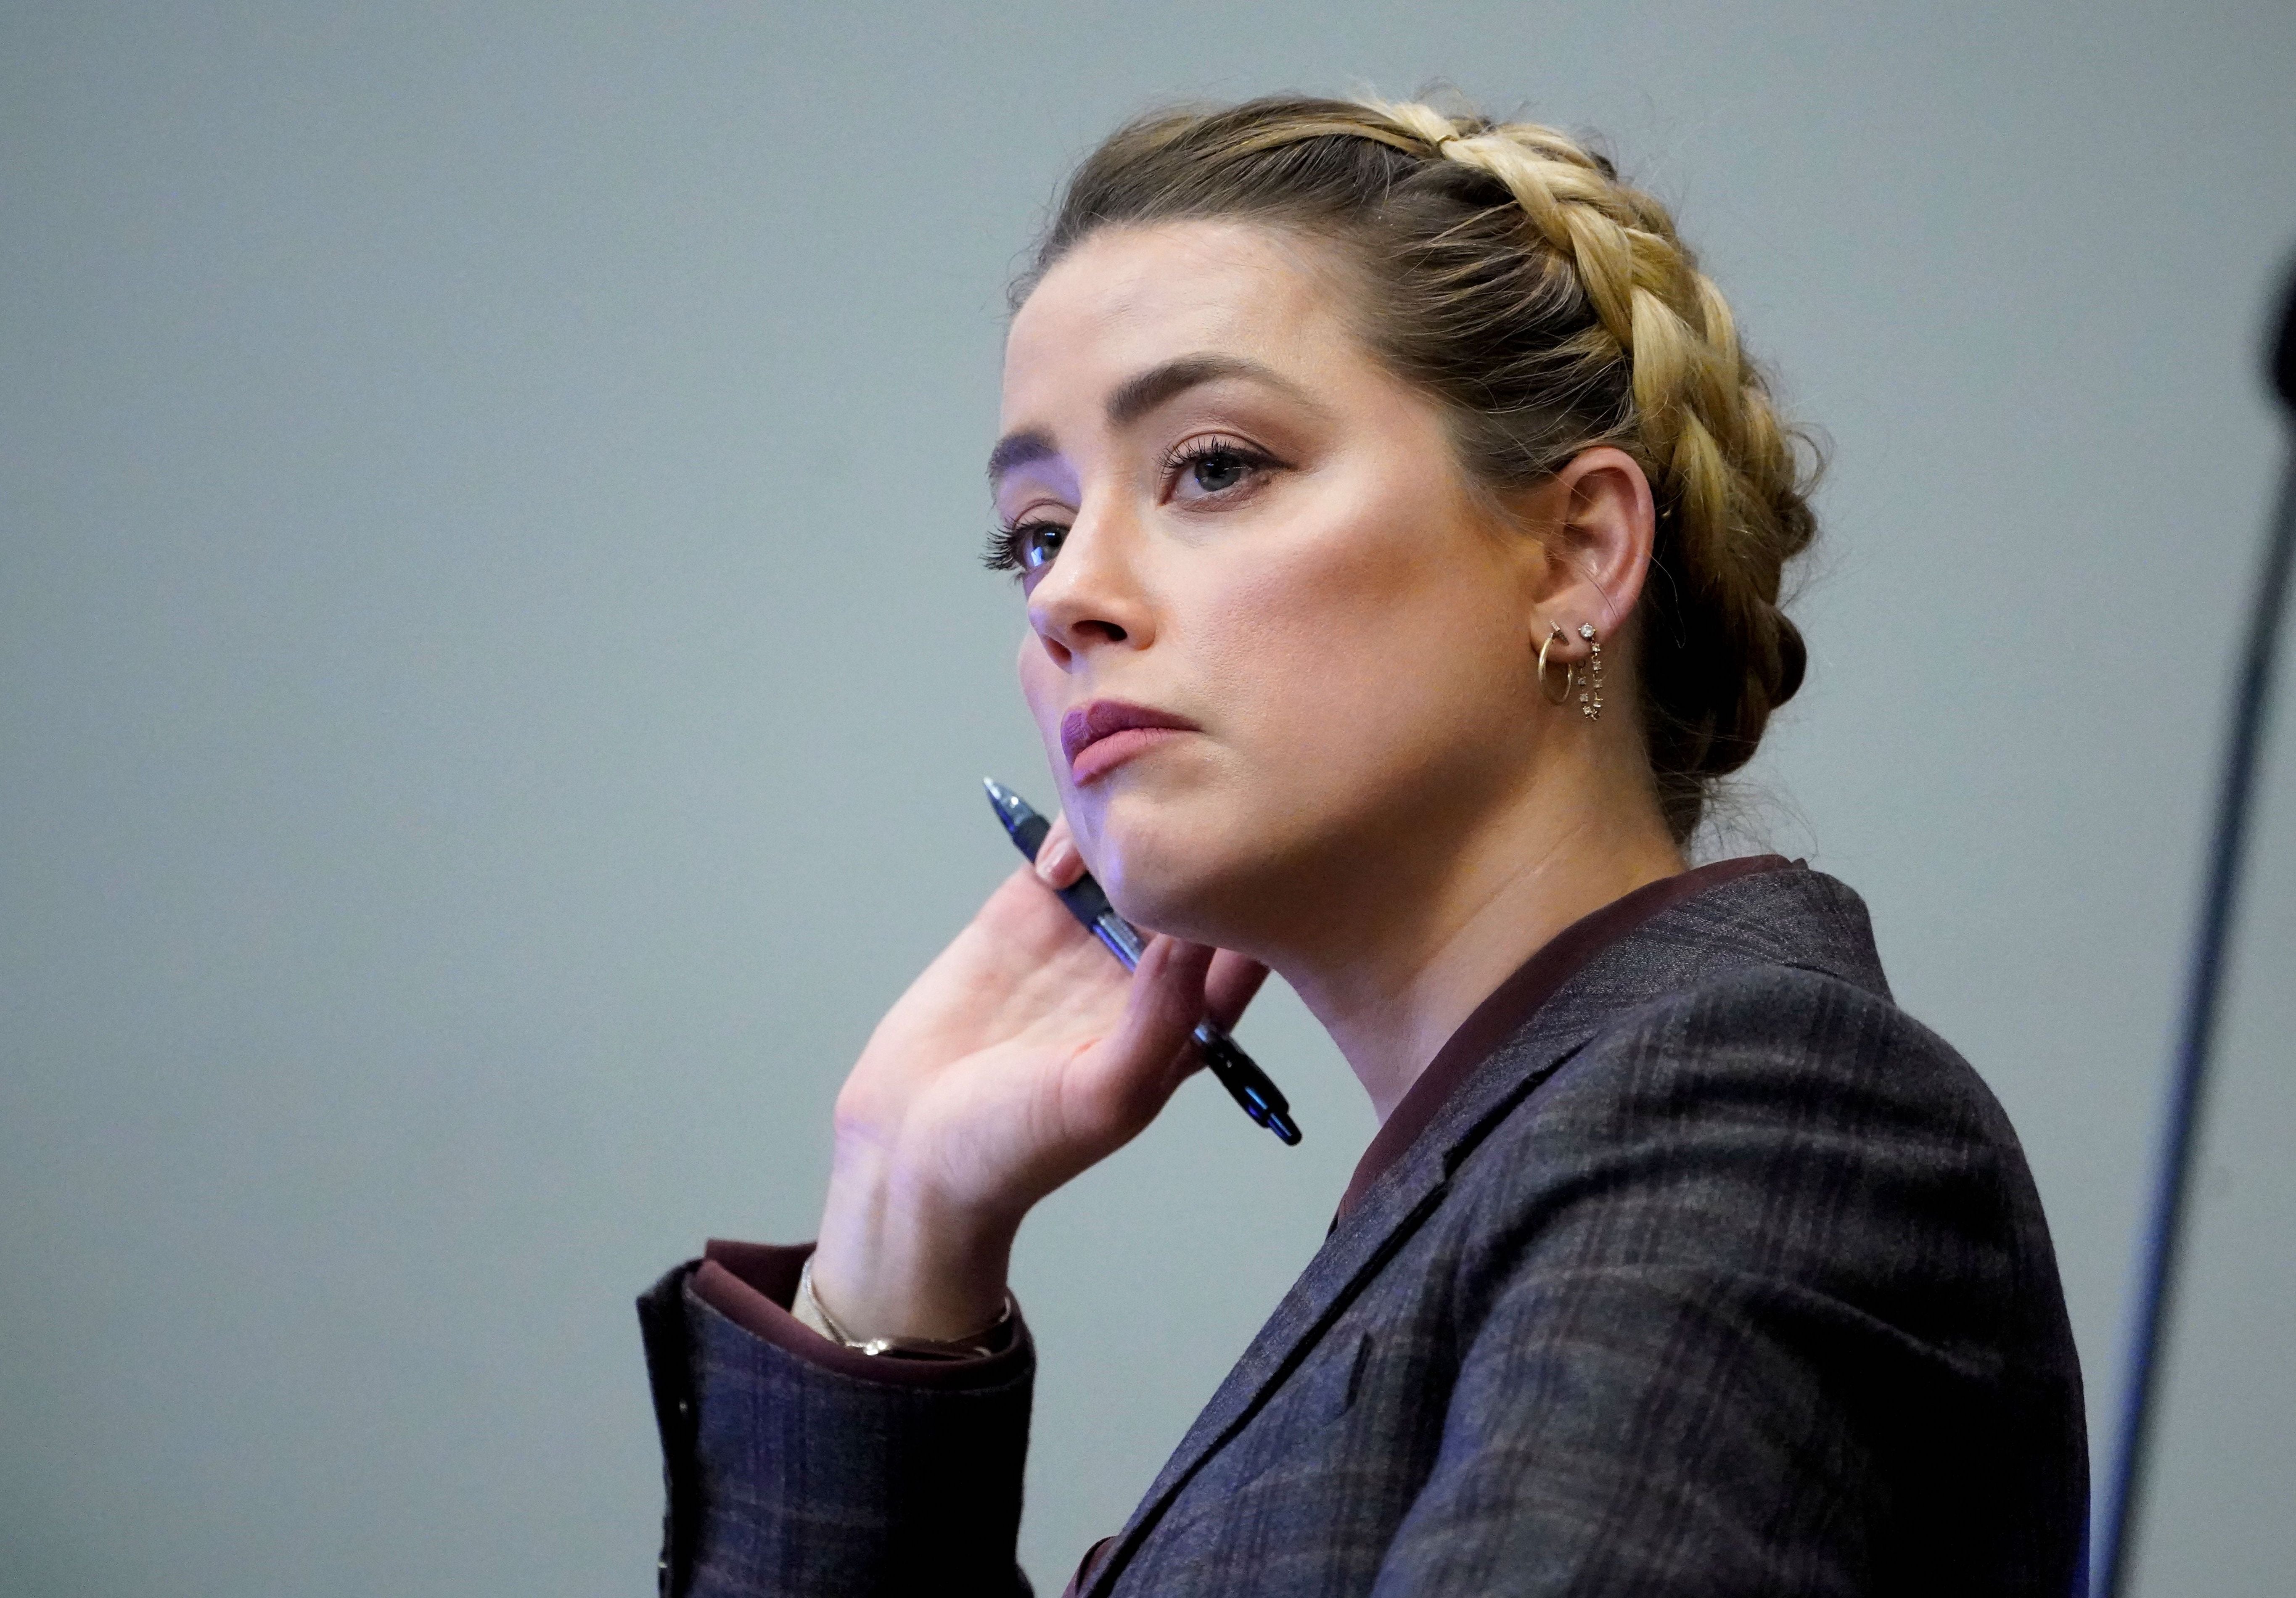 Amber Heard in court during the defamation trial brought by her ex-husband Johnny Depp